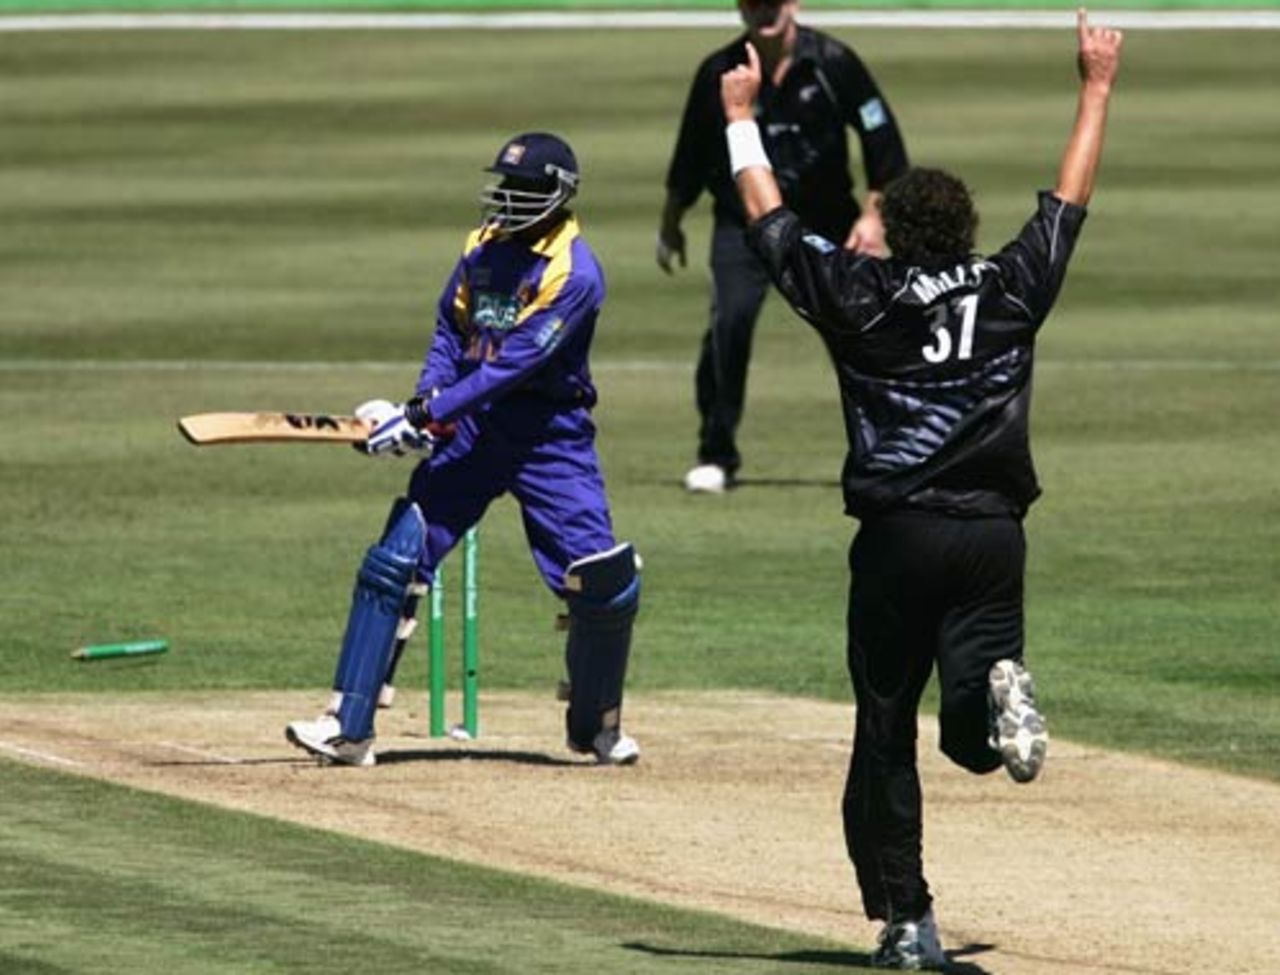 Russel Arnold loses his off stump to Kyle Mills, New Zealand v Sri Lanka, 1st ODI, Queenstown, December 31, 2005